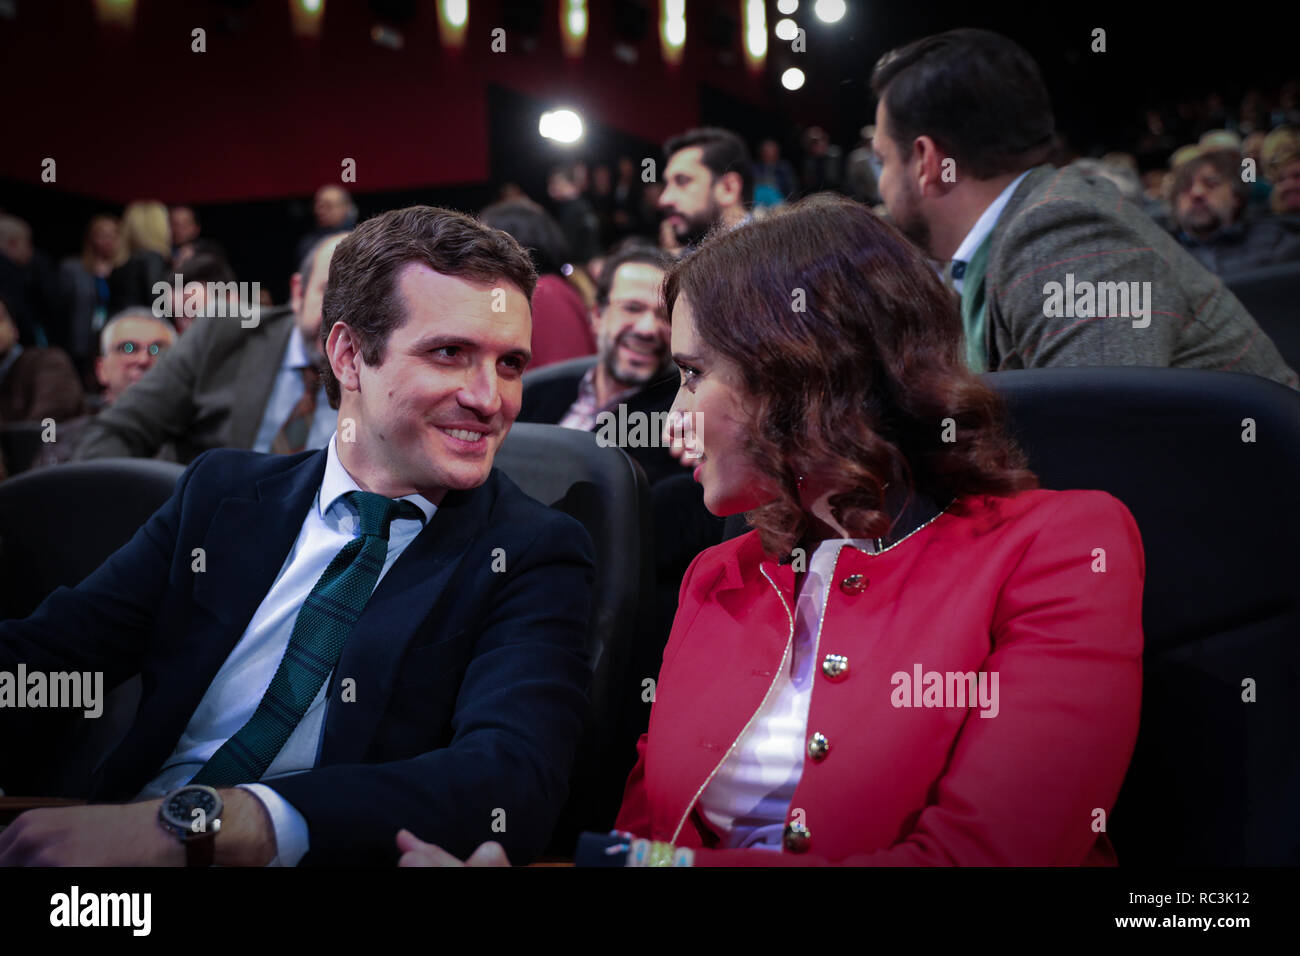 Madrid, Spain. 13th Janaury 2019. PABLO CASADO, President of the National Popular Party and ISABEL DIAZ AYUSO, Candidate for Mayor of Madrid City Council attending the act. The PP of Madrid has celebrated this Sunday a multitudinous act in the theater Goya the presentation of José Luis Martínez-Almeida and Isabel Díaz Ayuso that will be the candidates of the PP to the City council and the Community of Madrid, respectively, for the next regional and local elections of May on Jan 13, 2019 in Madrid, Spain Credit: Jesús Hellin/Alamy Live News Stock Photo